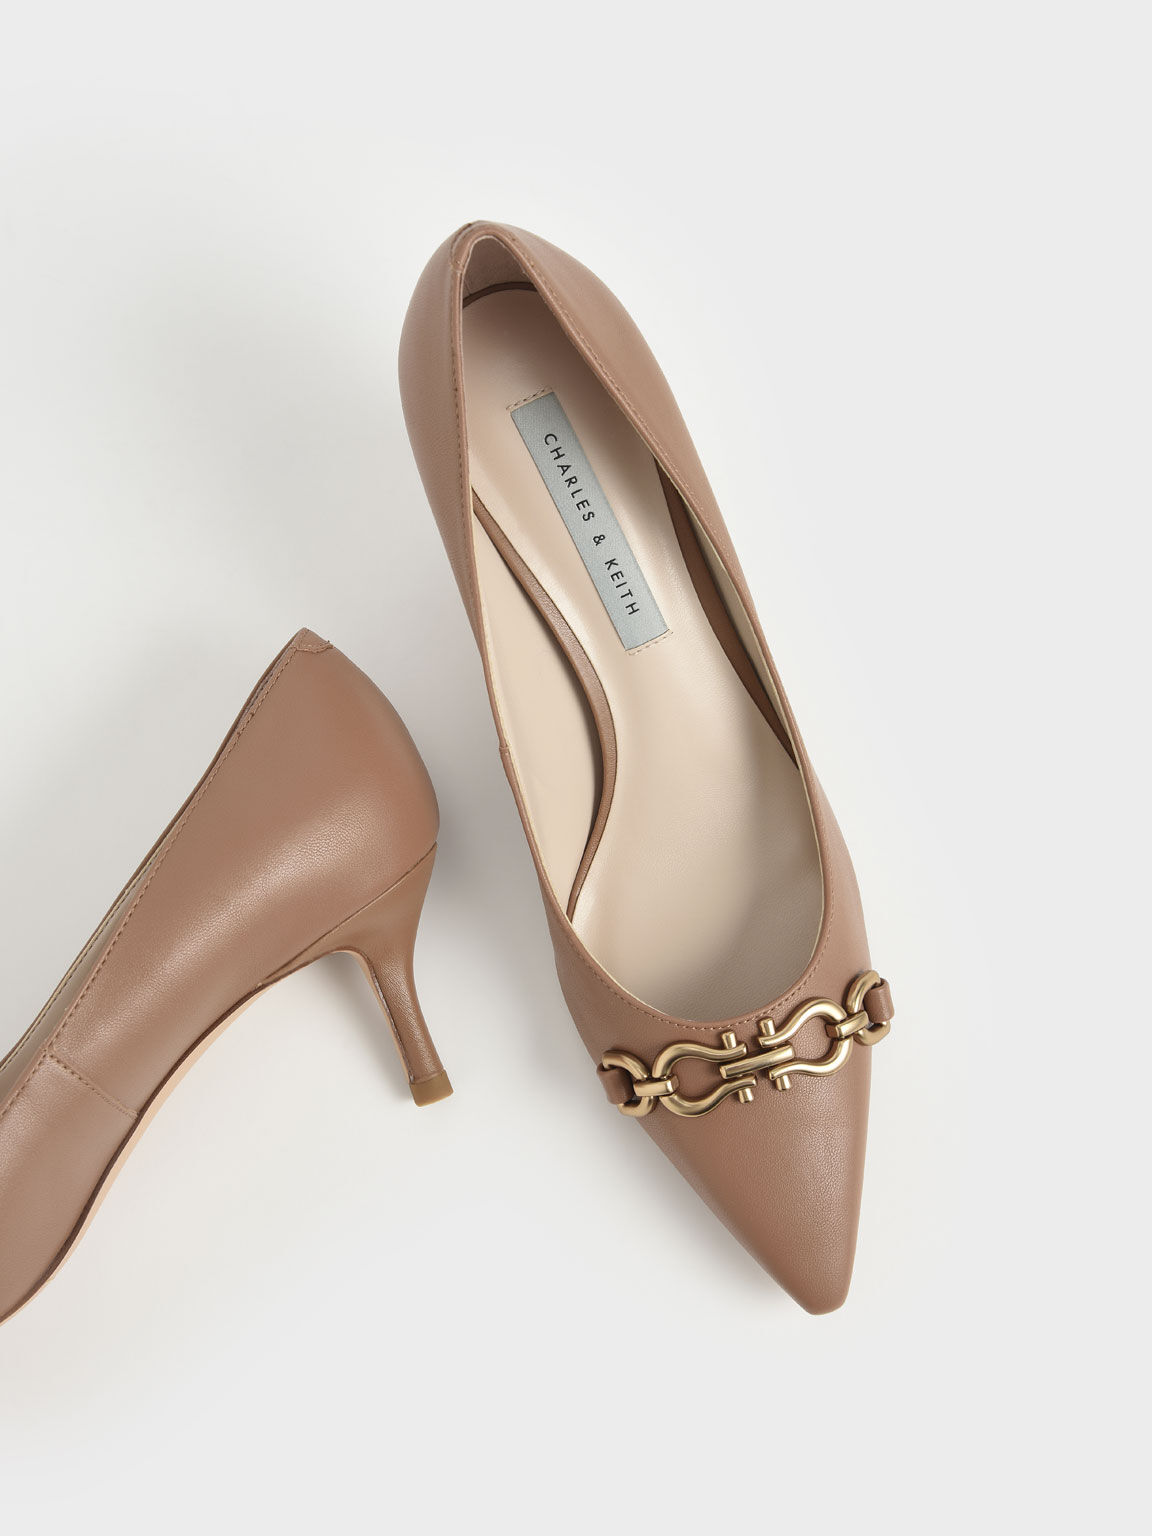 Chain Link Pointed Toe Pumps, Camel, hi-res